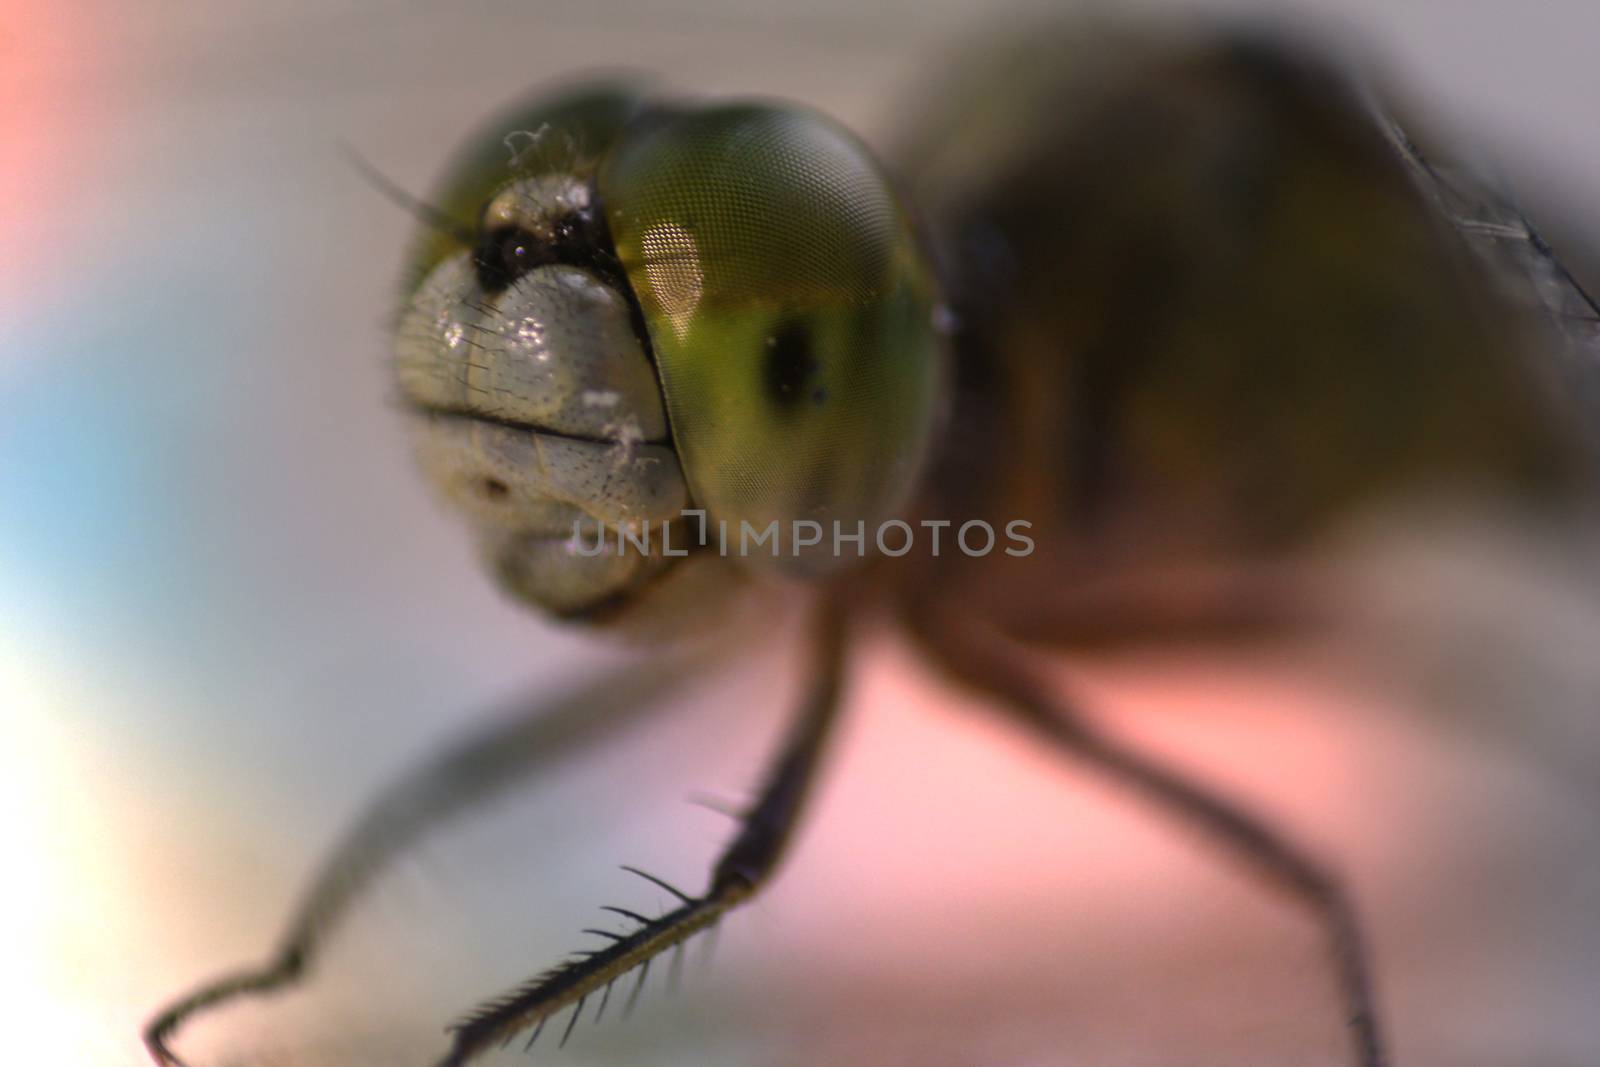 A macro detailed view of the eyes of a green dragonfly species.